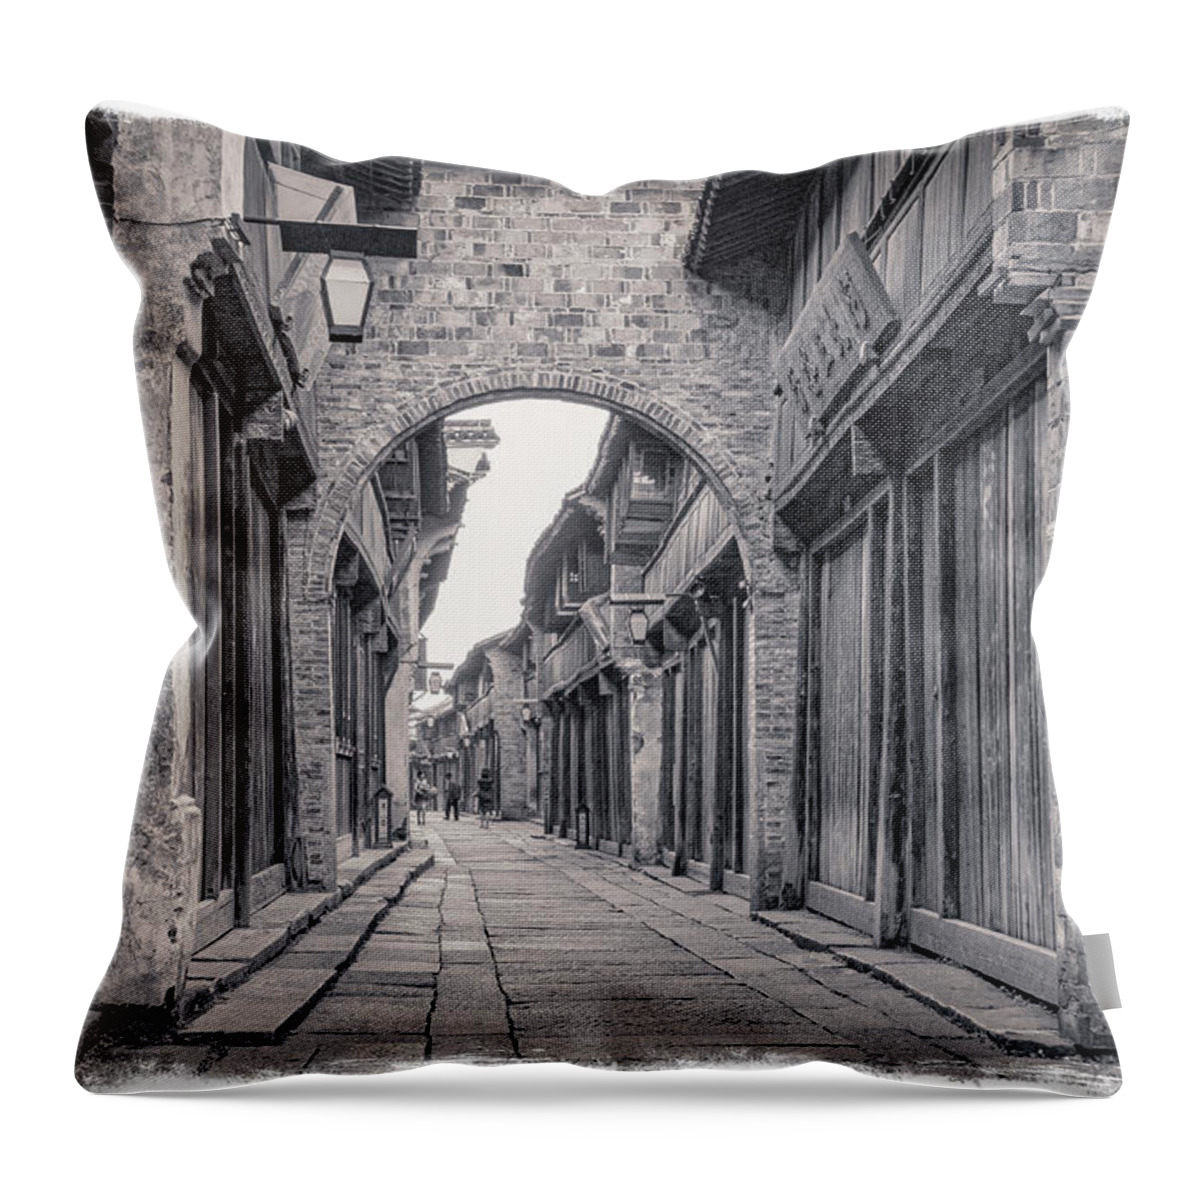 Asia Throw Pillow featuring the photograph Timeless. by Usha Peddamatham